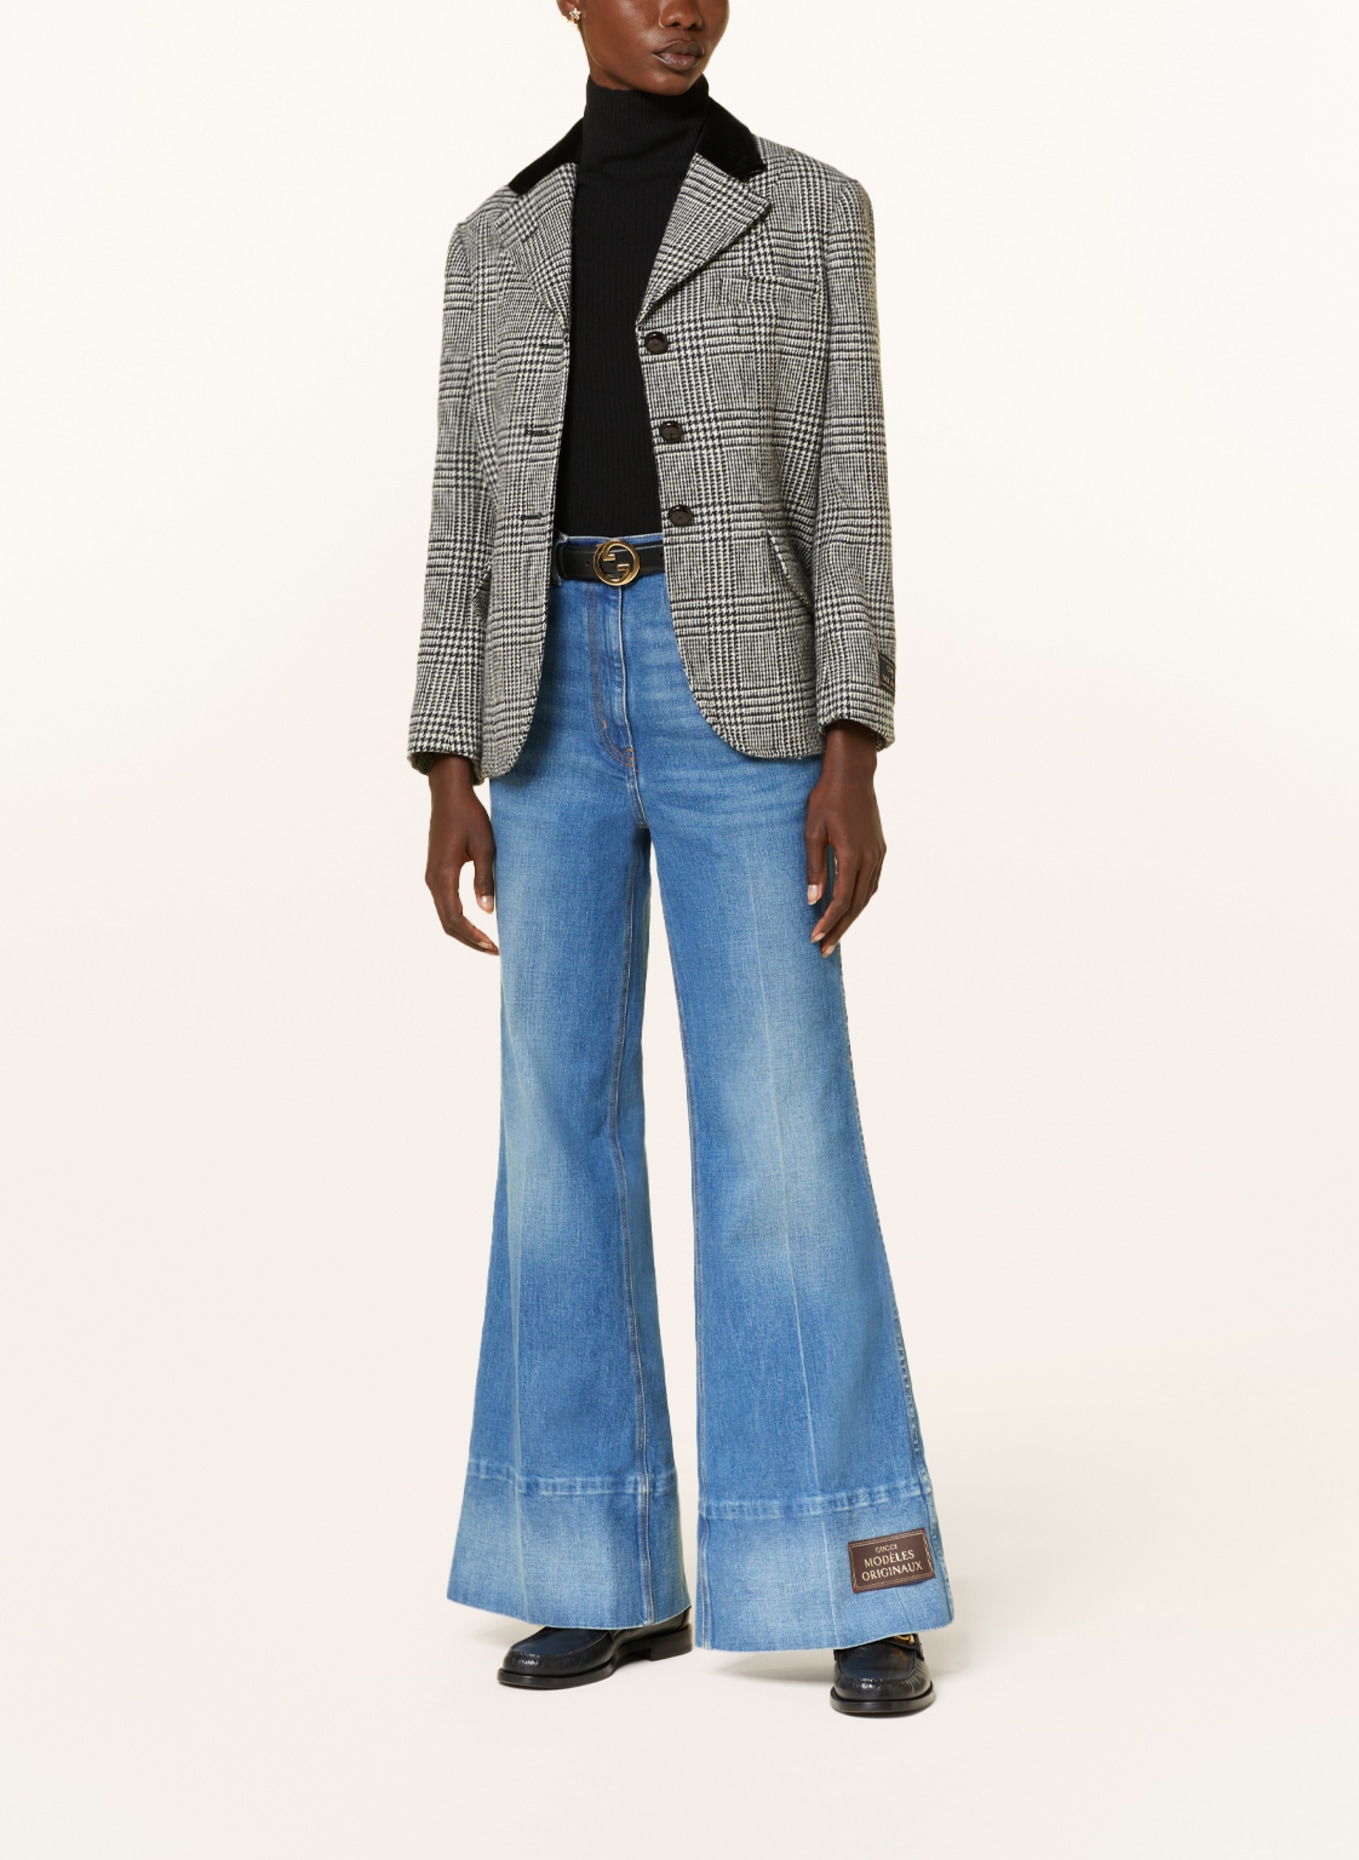 GUCCI Flared jeans, Color: 4759 DARK BLUE/MIX (Image 2)